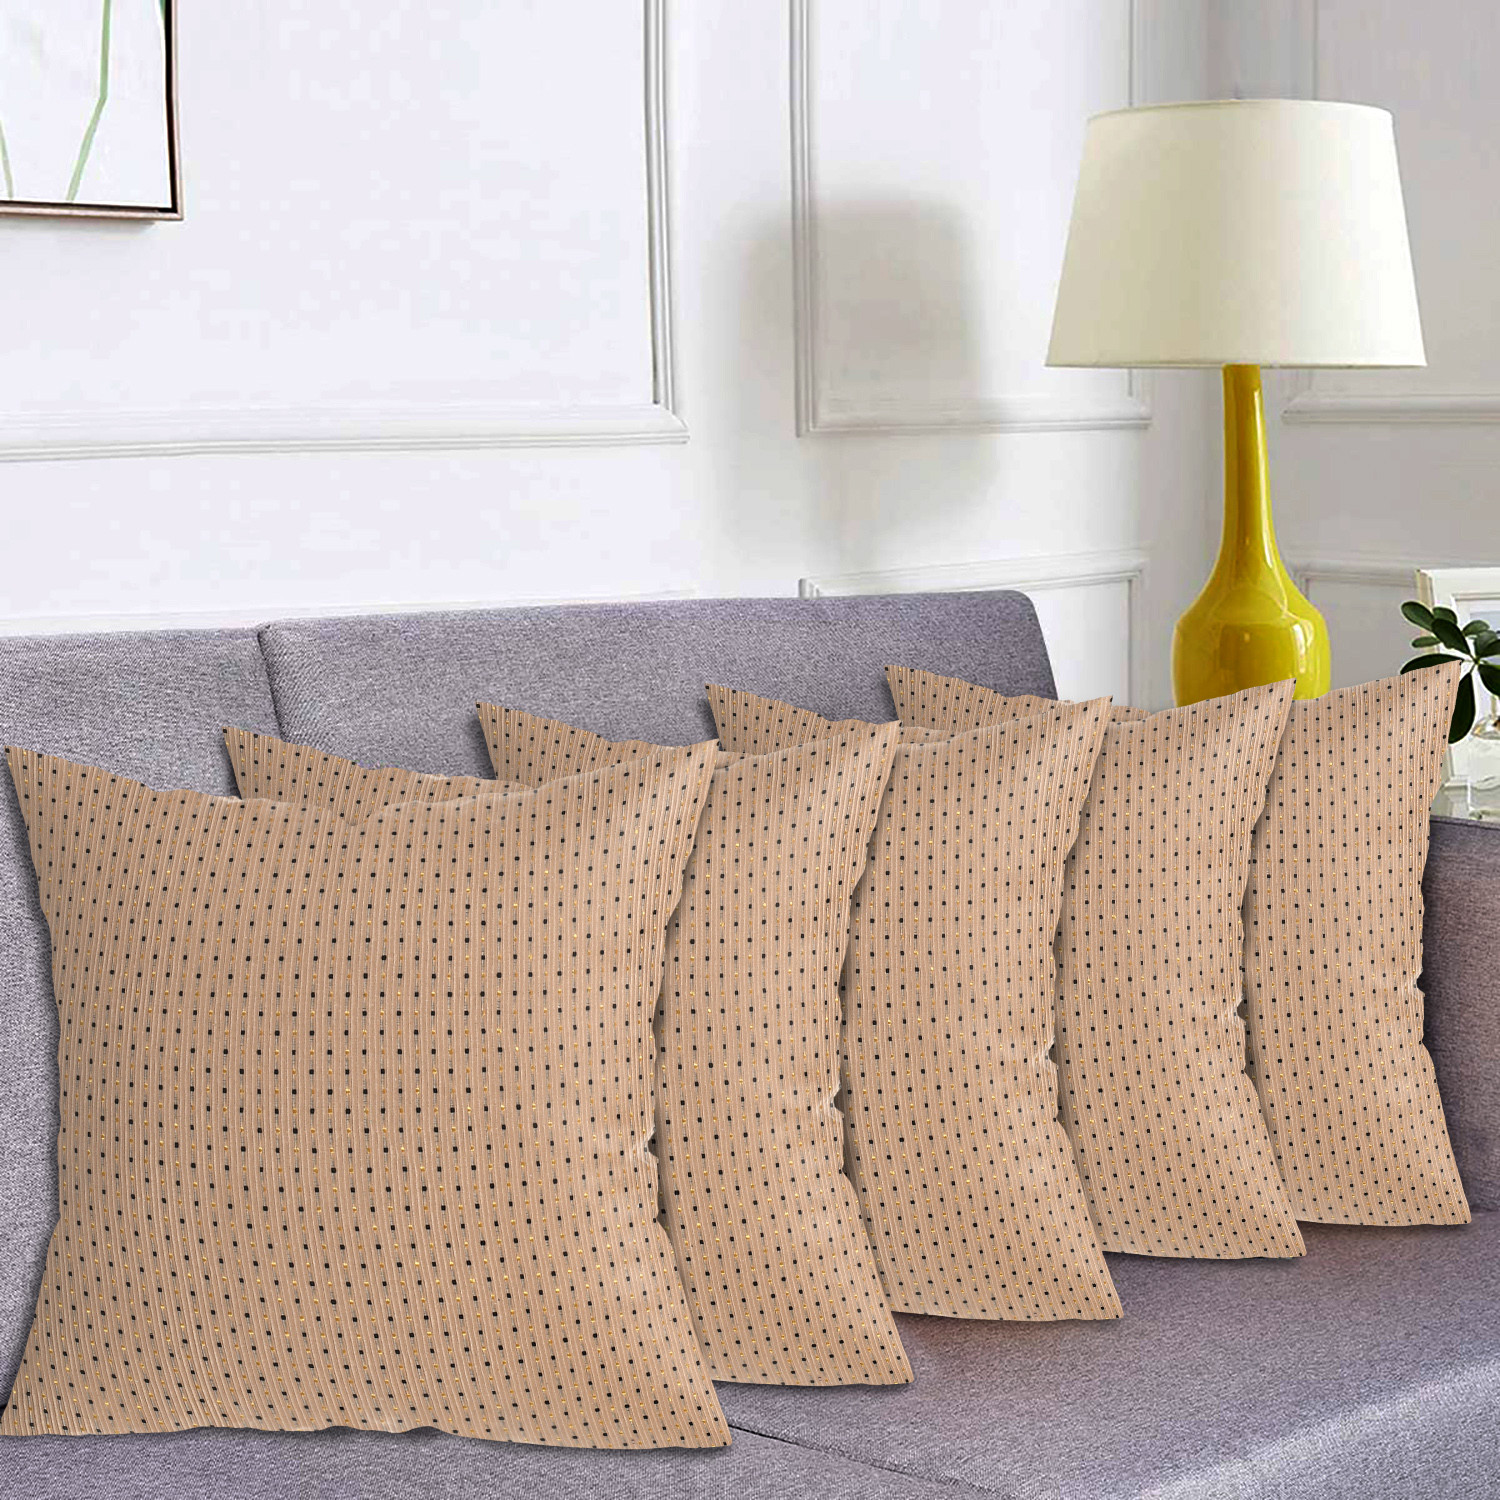 Kuber Industries Dot Print Soft Decorative Square Cushion Cover, Cushion Case For Sofa Couch Bed 16x16 Inch-(Beige)